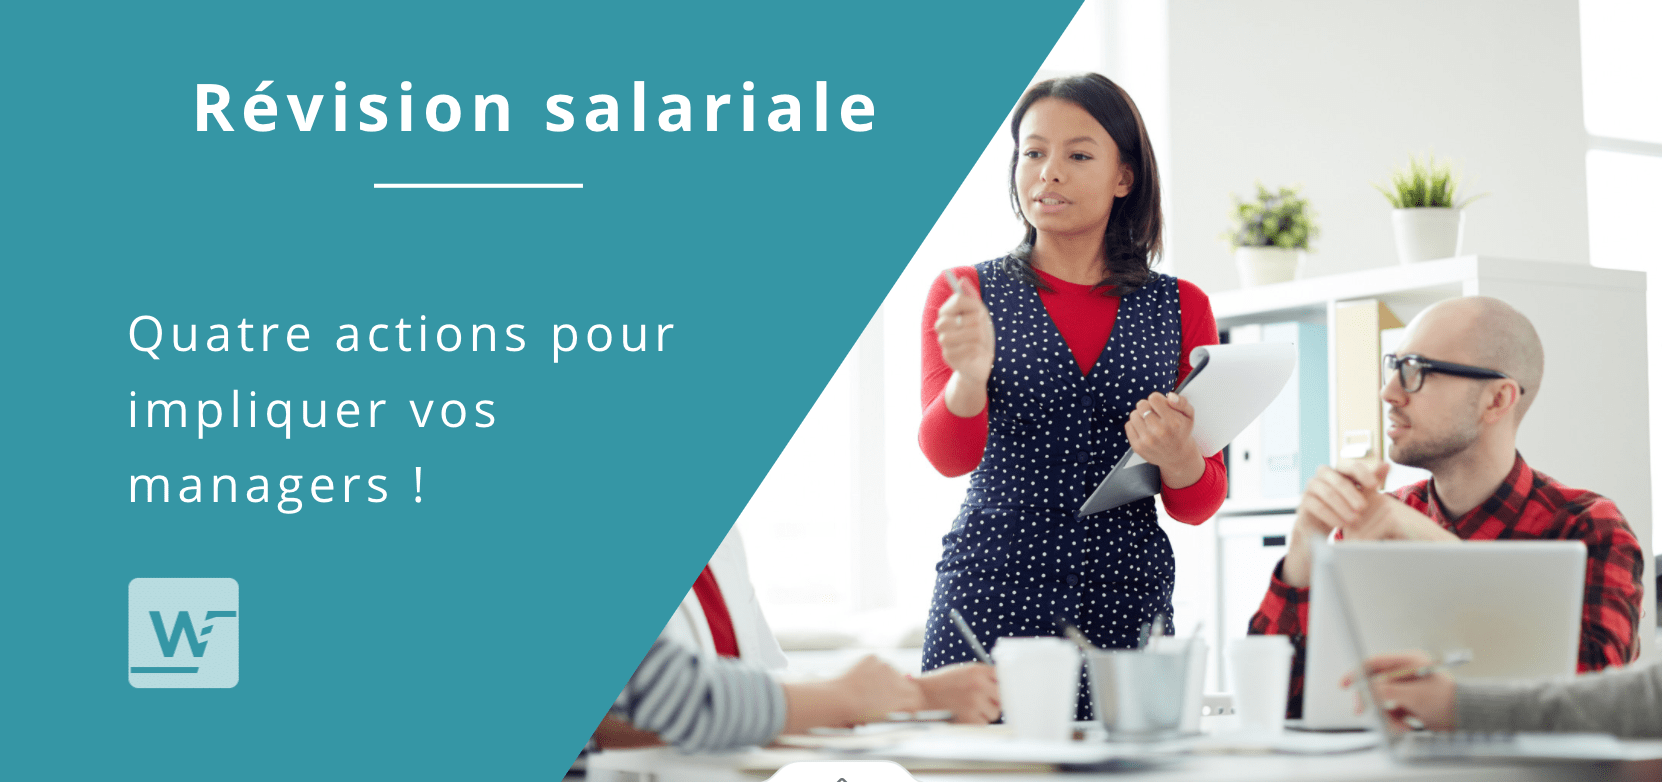 managers : impliquer revision salariale